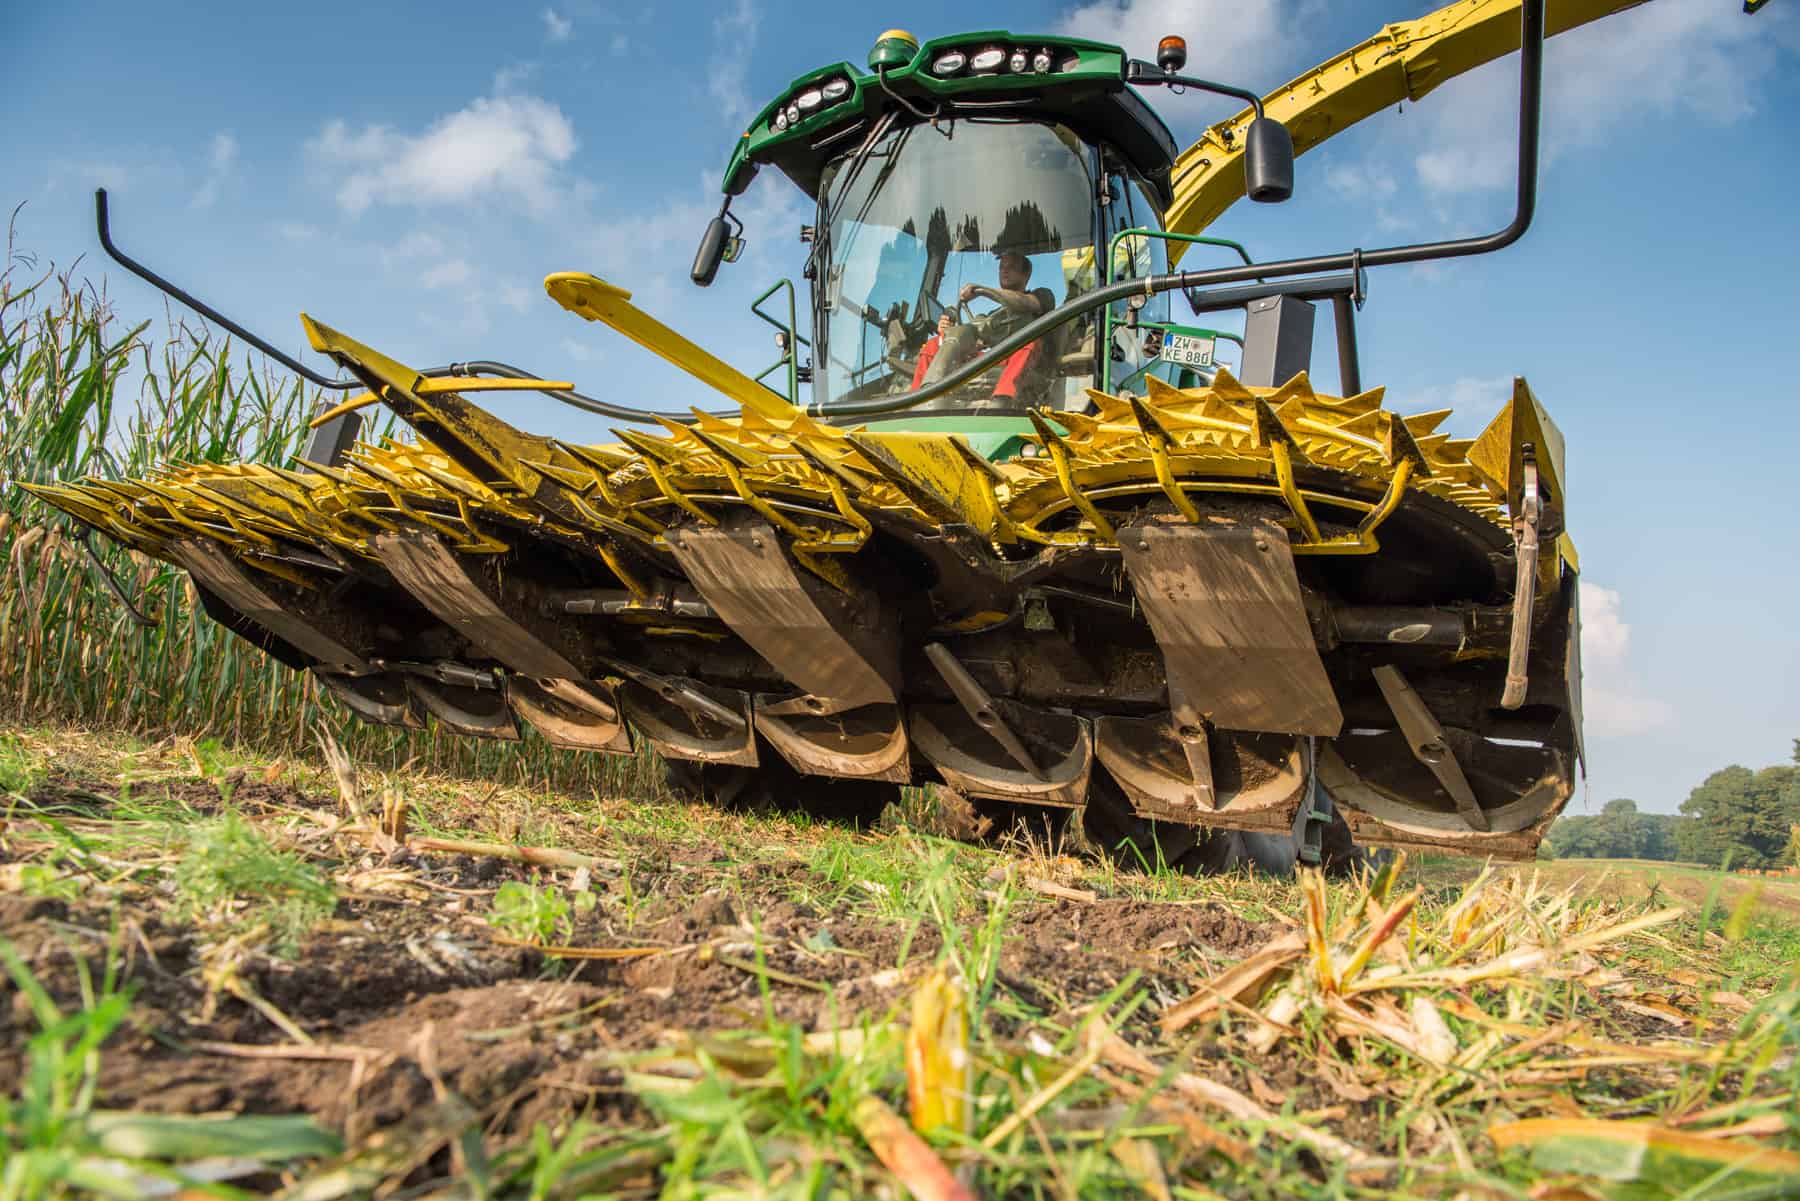 John Deere updates self-propelled foragers for 2020